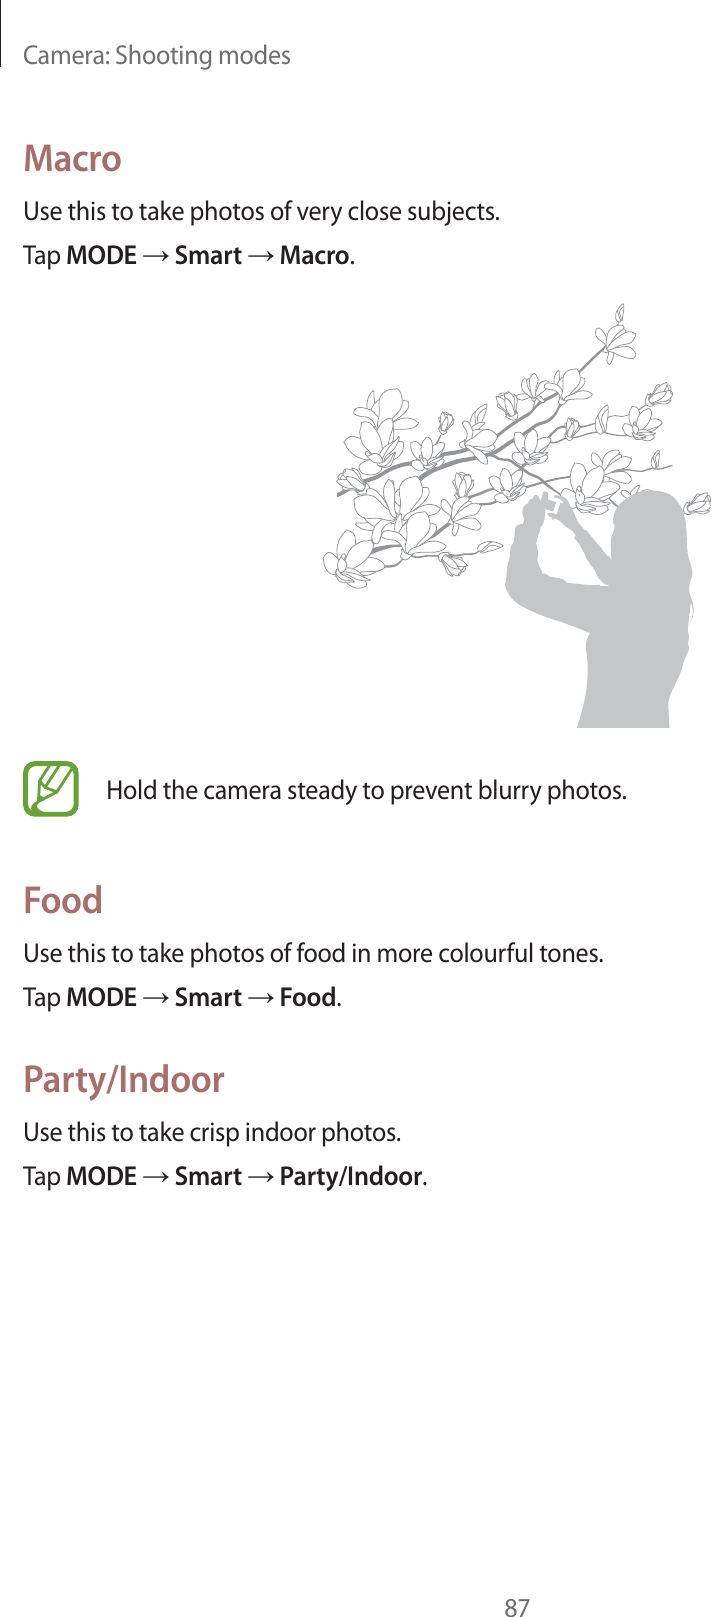 Camera: Shooting modes87MacroUse this to take photos of very close subjects.Tap MODE  Smart  Macro.Hold the camera steady to prevent blurry photos.FoodUse this to take photos of food in more colourful tones.Tap MODE  Smart  Food.Party/IndoorUse this to take crisp indoor photos.Tap MODE  Smart  Party/Indoor.